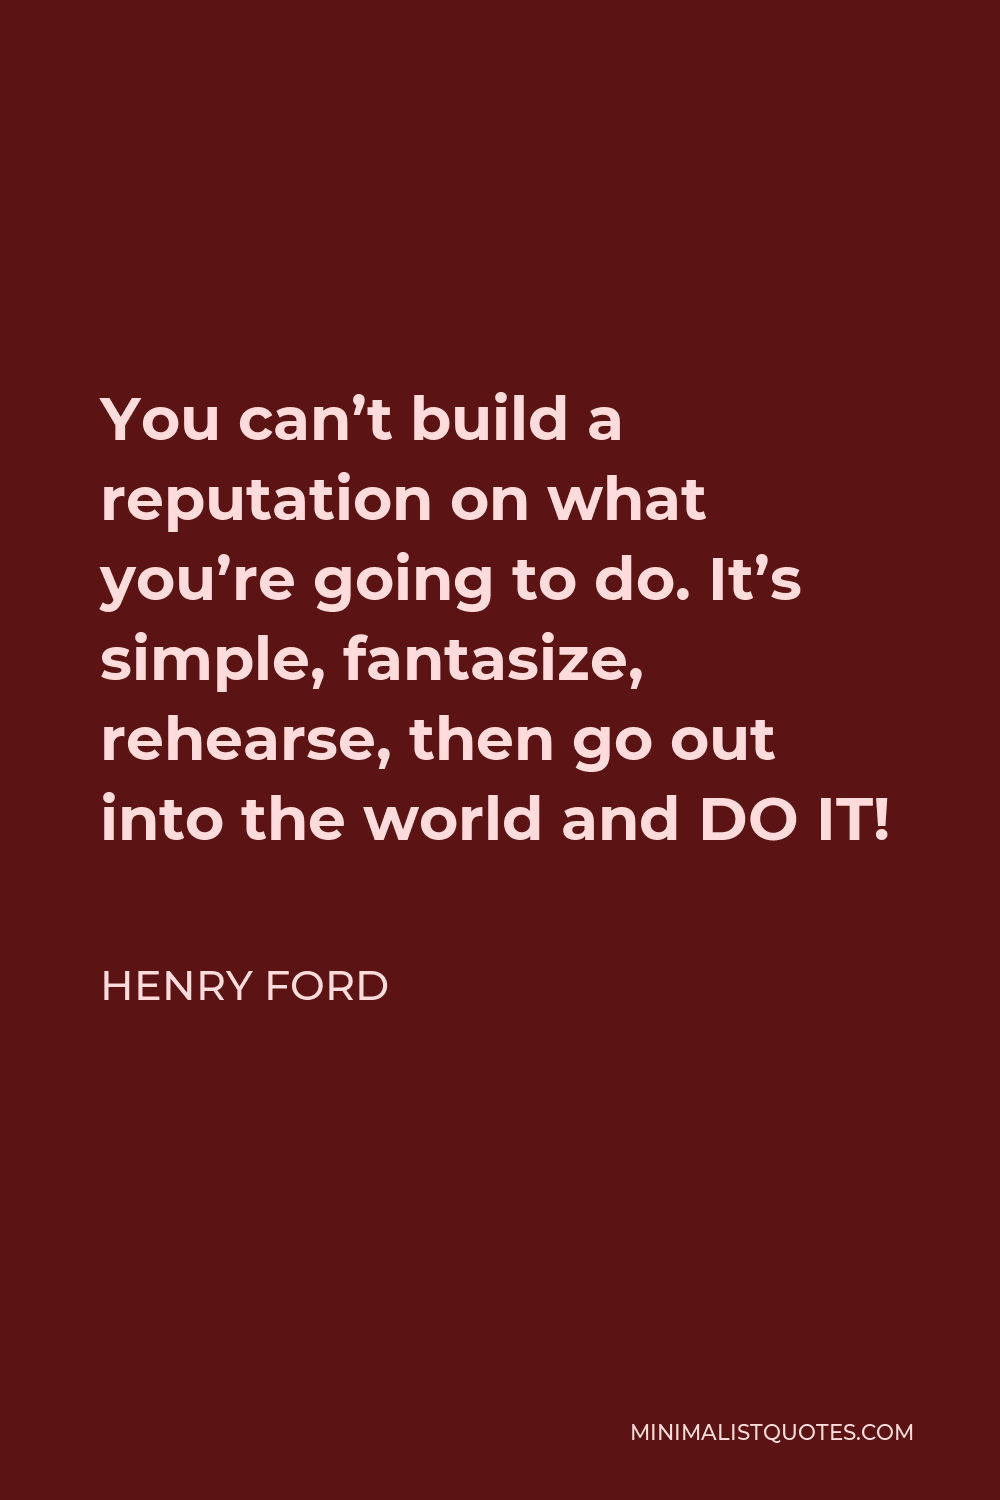 Henry Ford Quote - You can’t build a reputation on what you’re going to do. It’s simple, fantasize, rehearse, then go out into the world and DO IT!